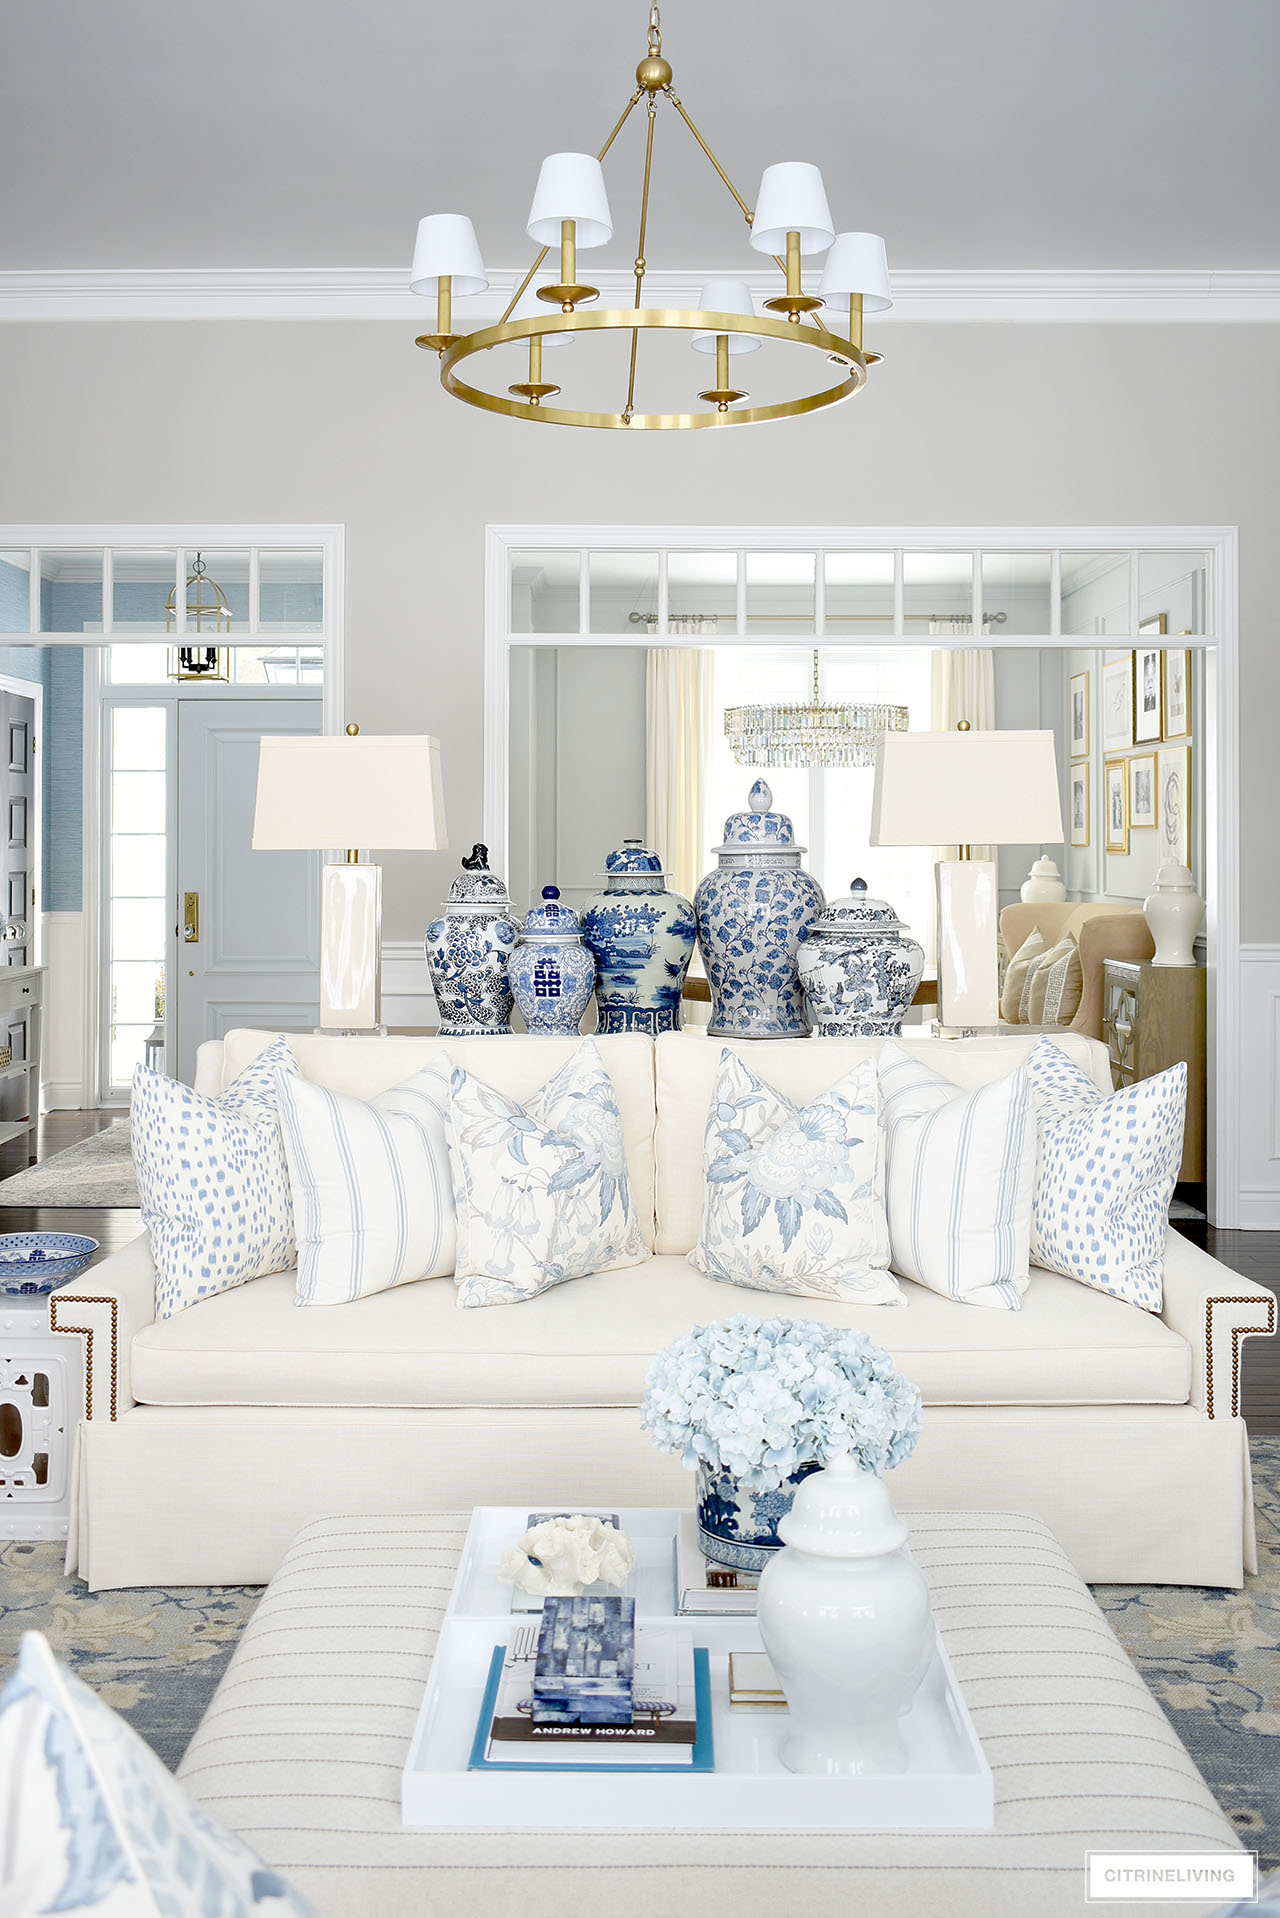 Living room with blue and white decor, an arrangement of ginger jars in varying sizes behind the sofa.